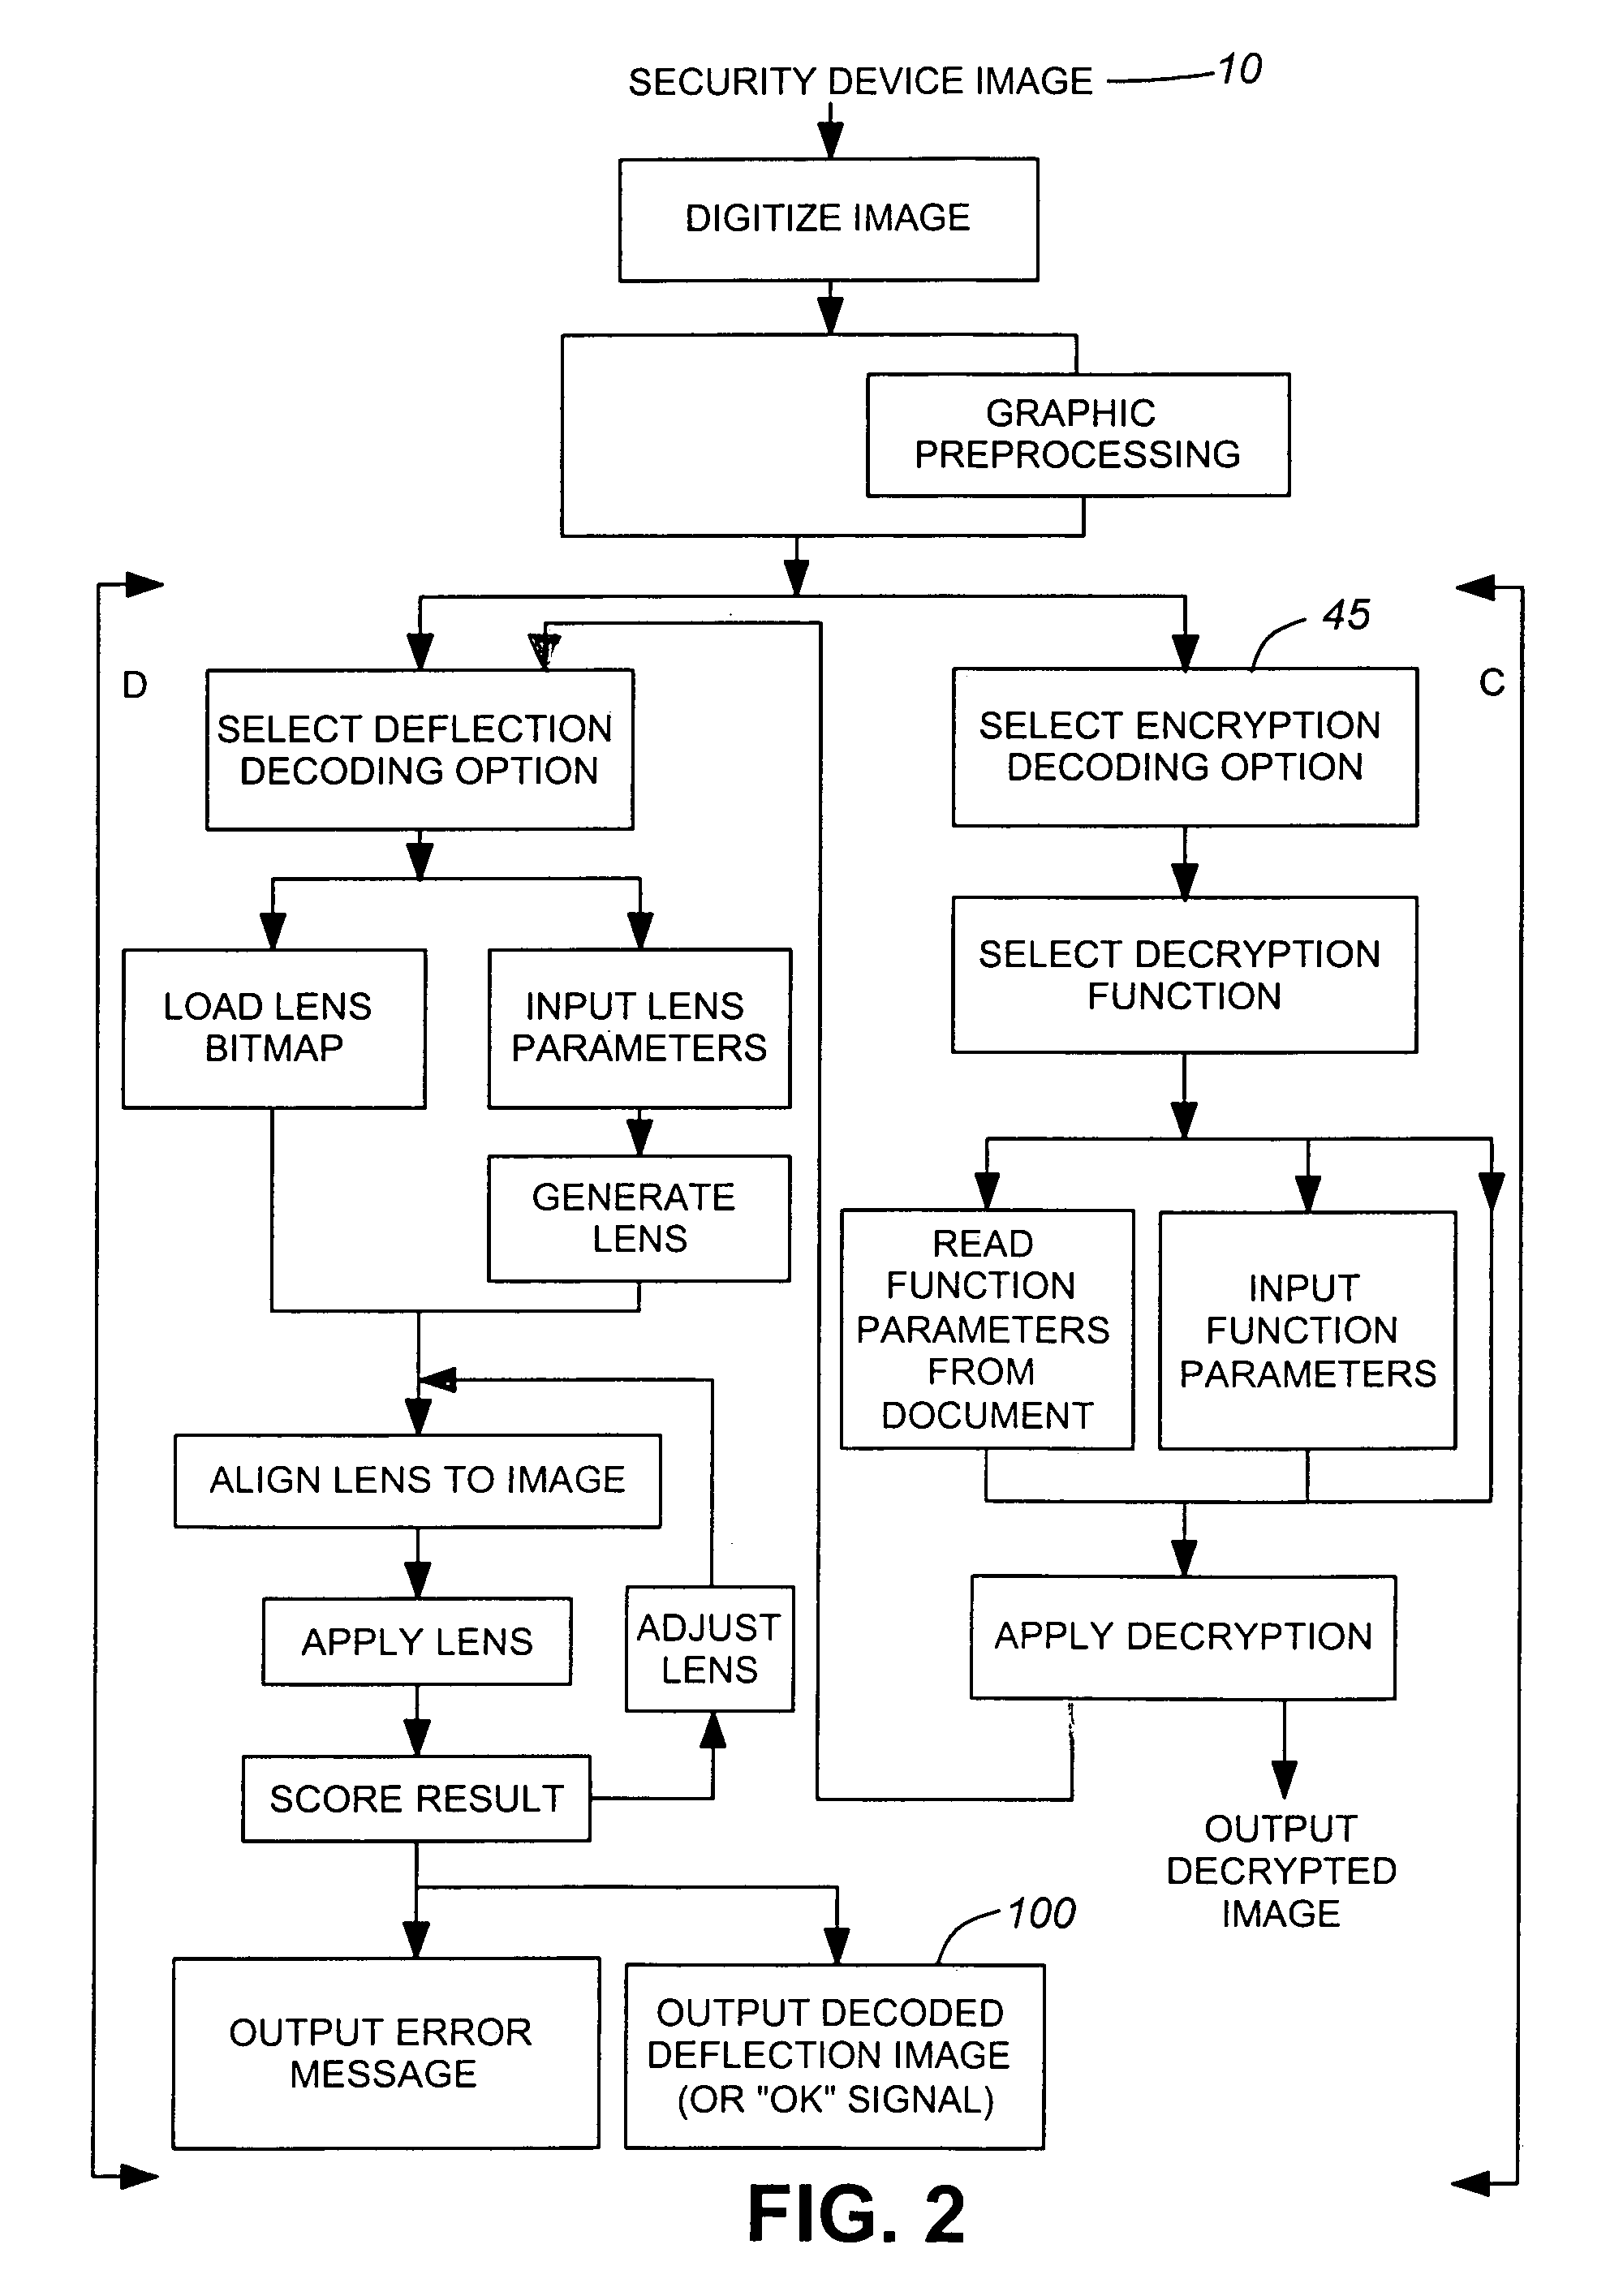 System for producing a printable security device image and detecting latent source image(s) therefrom